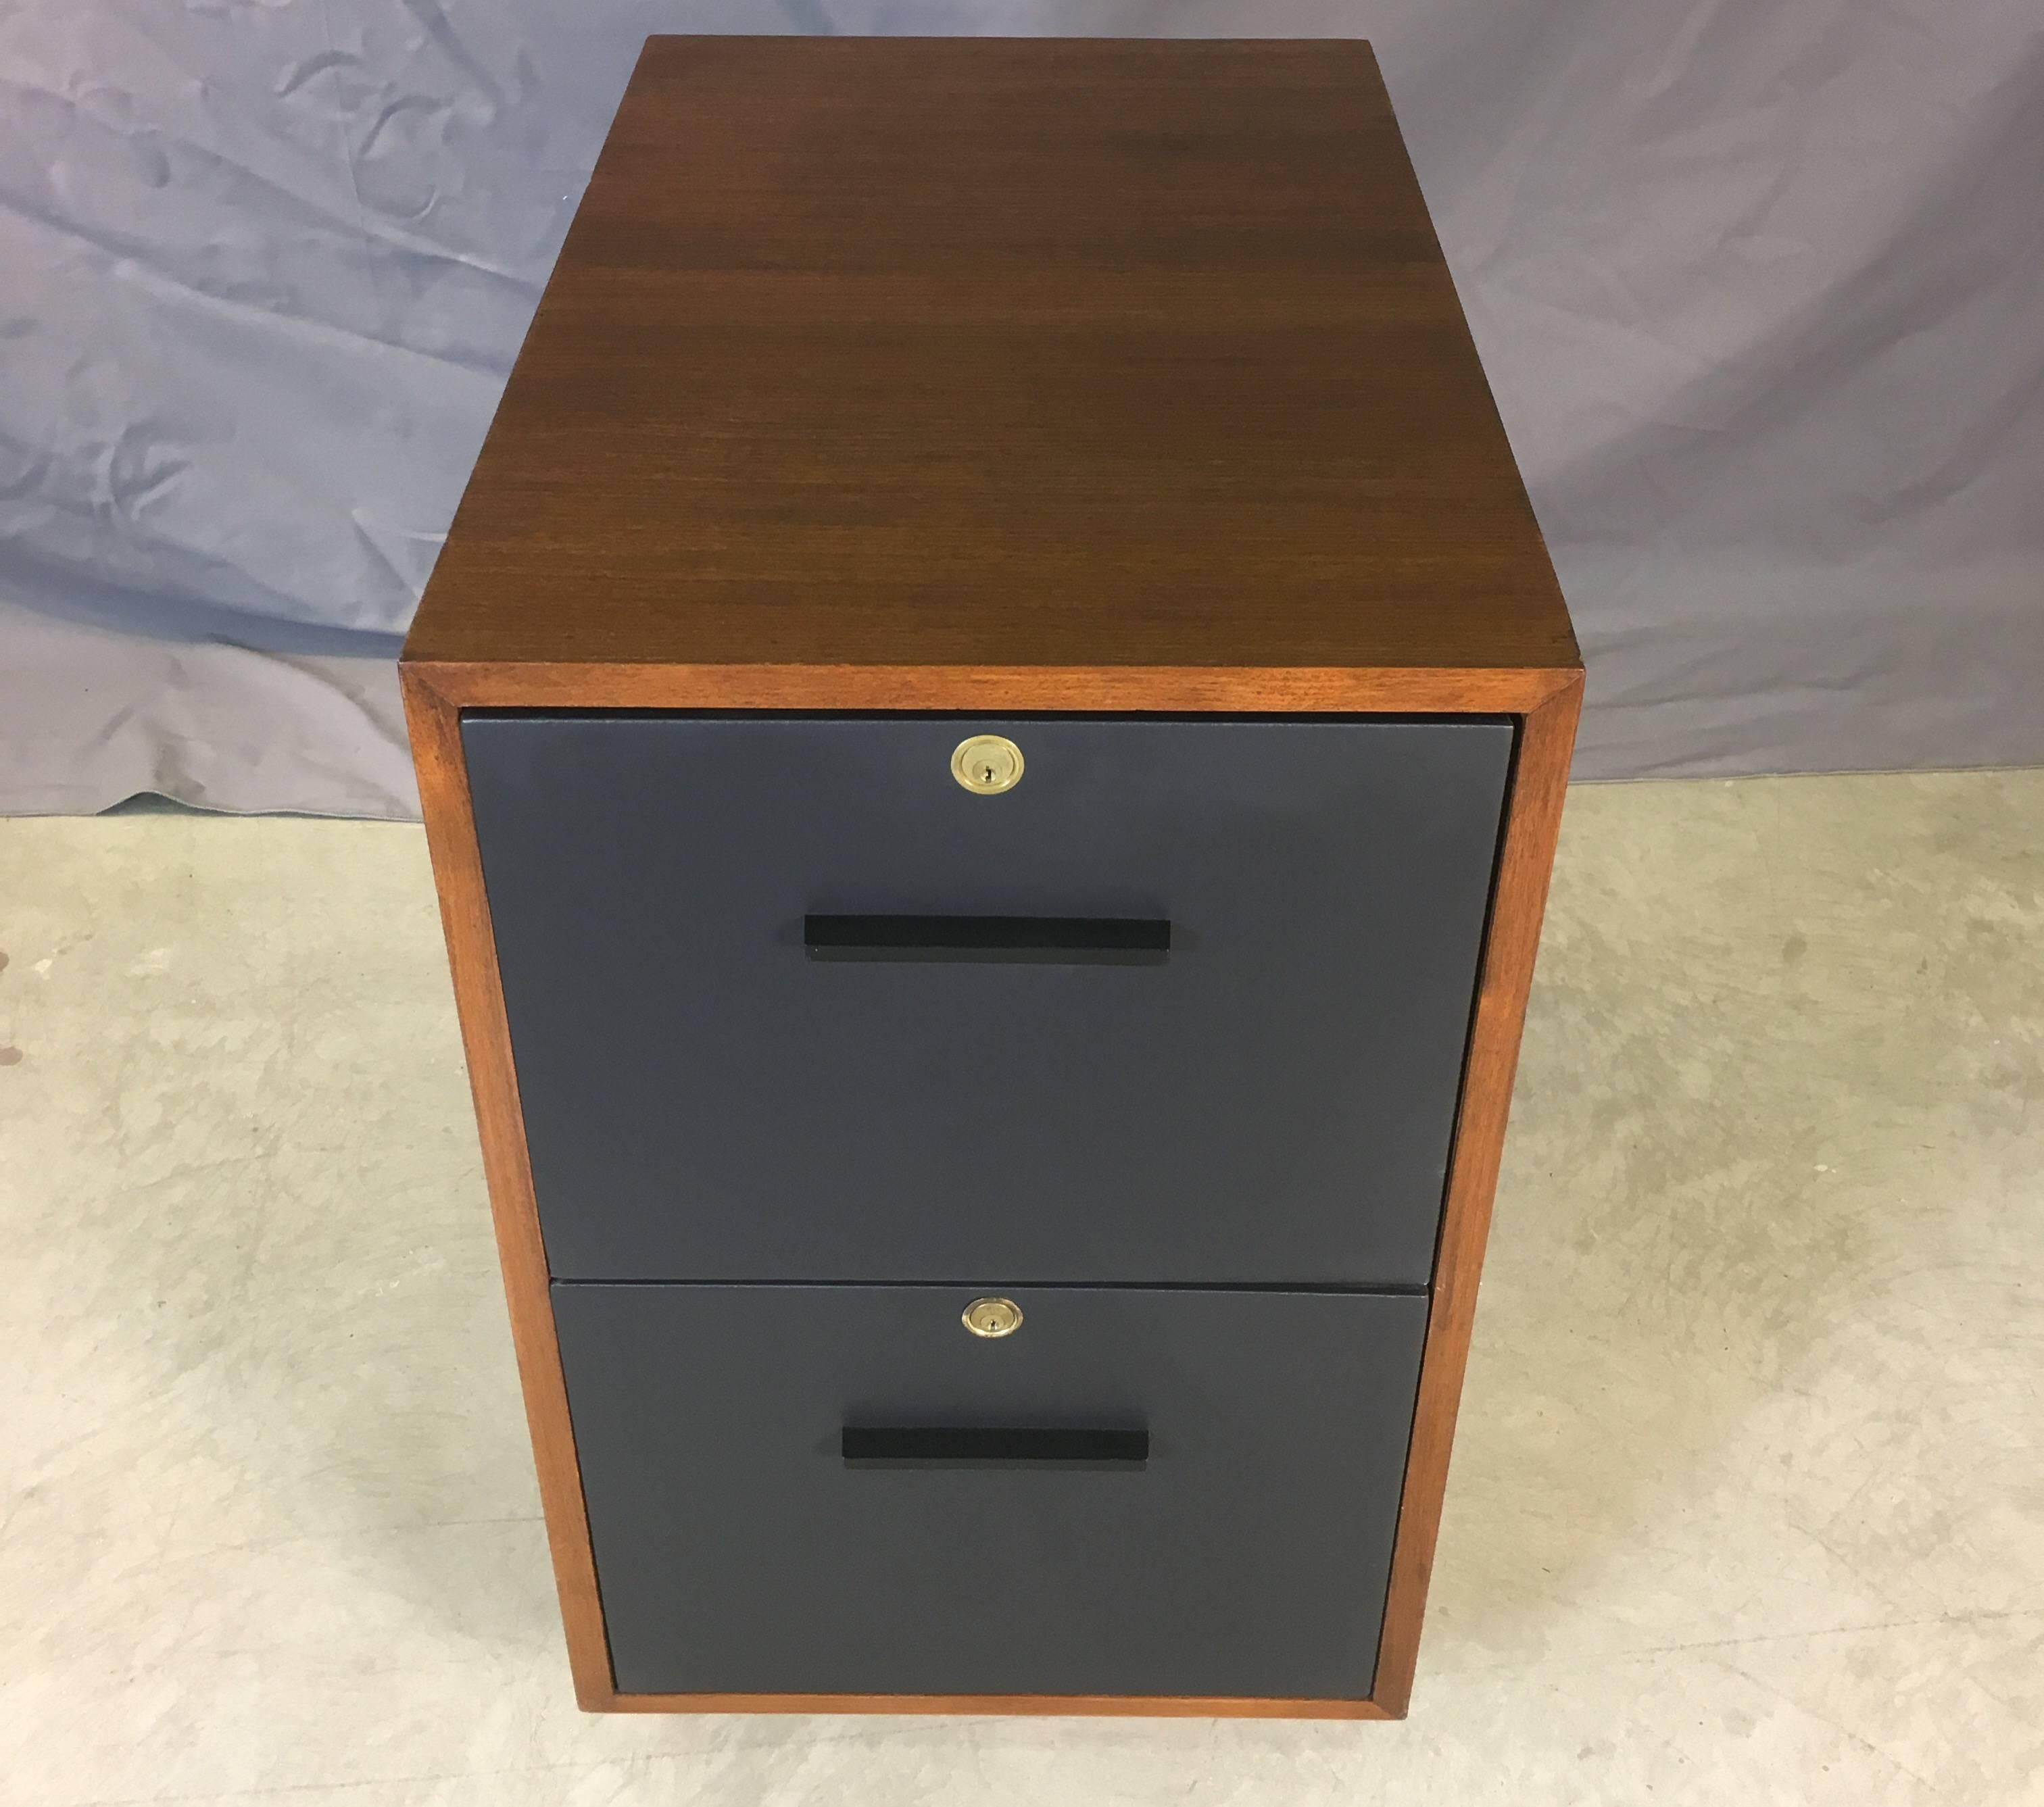 Vintage mid-20th century teak wood and leather front rolling file cabinet. The cabinet has two drawers for storage. The drawer fronts are wrapped in leather. Fully restored. Inside drawer holds 15” hanging files. Unmarked.